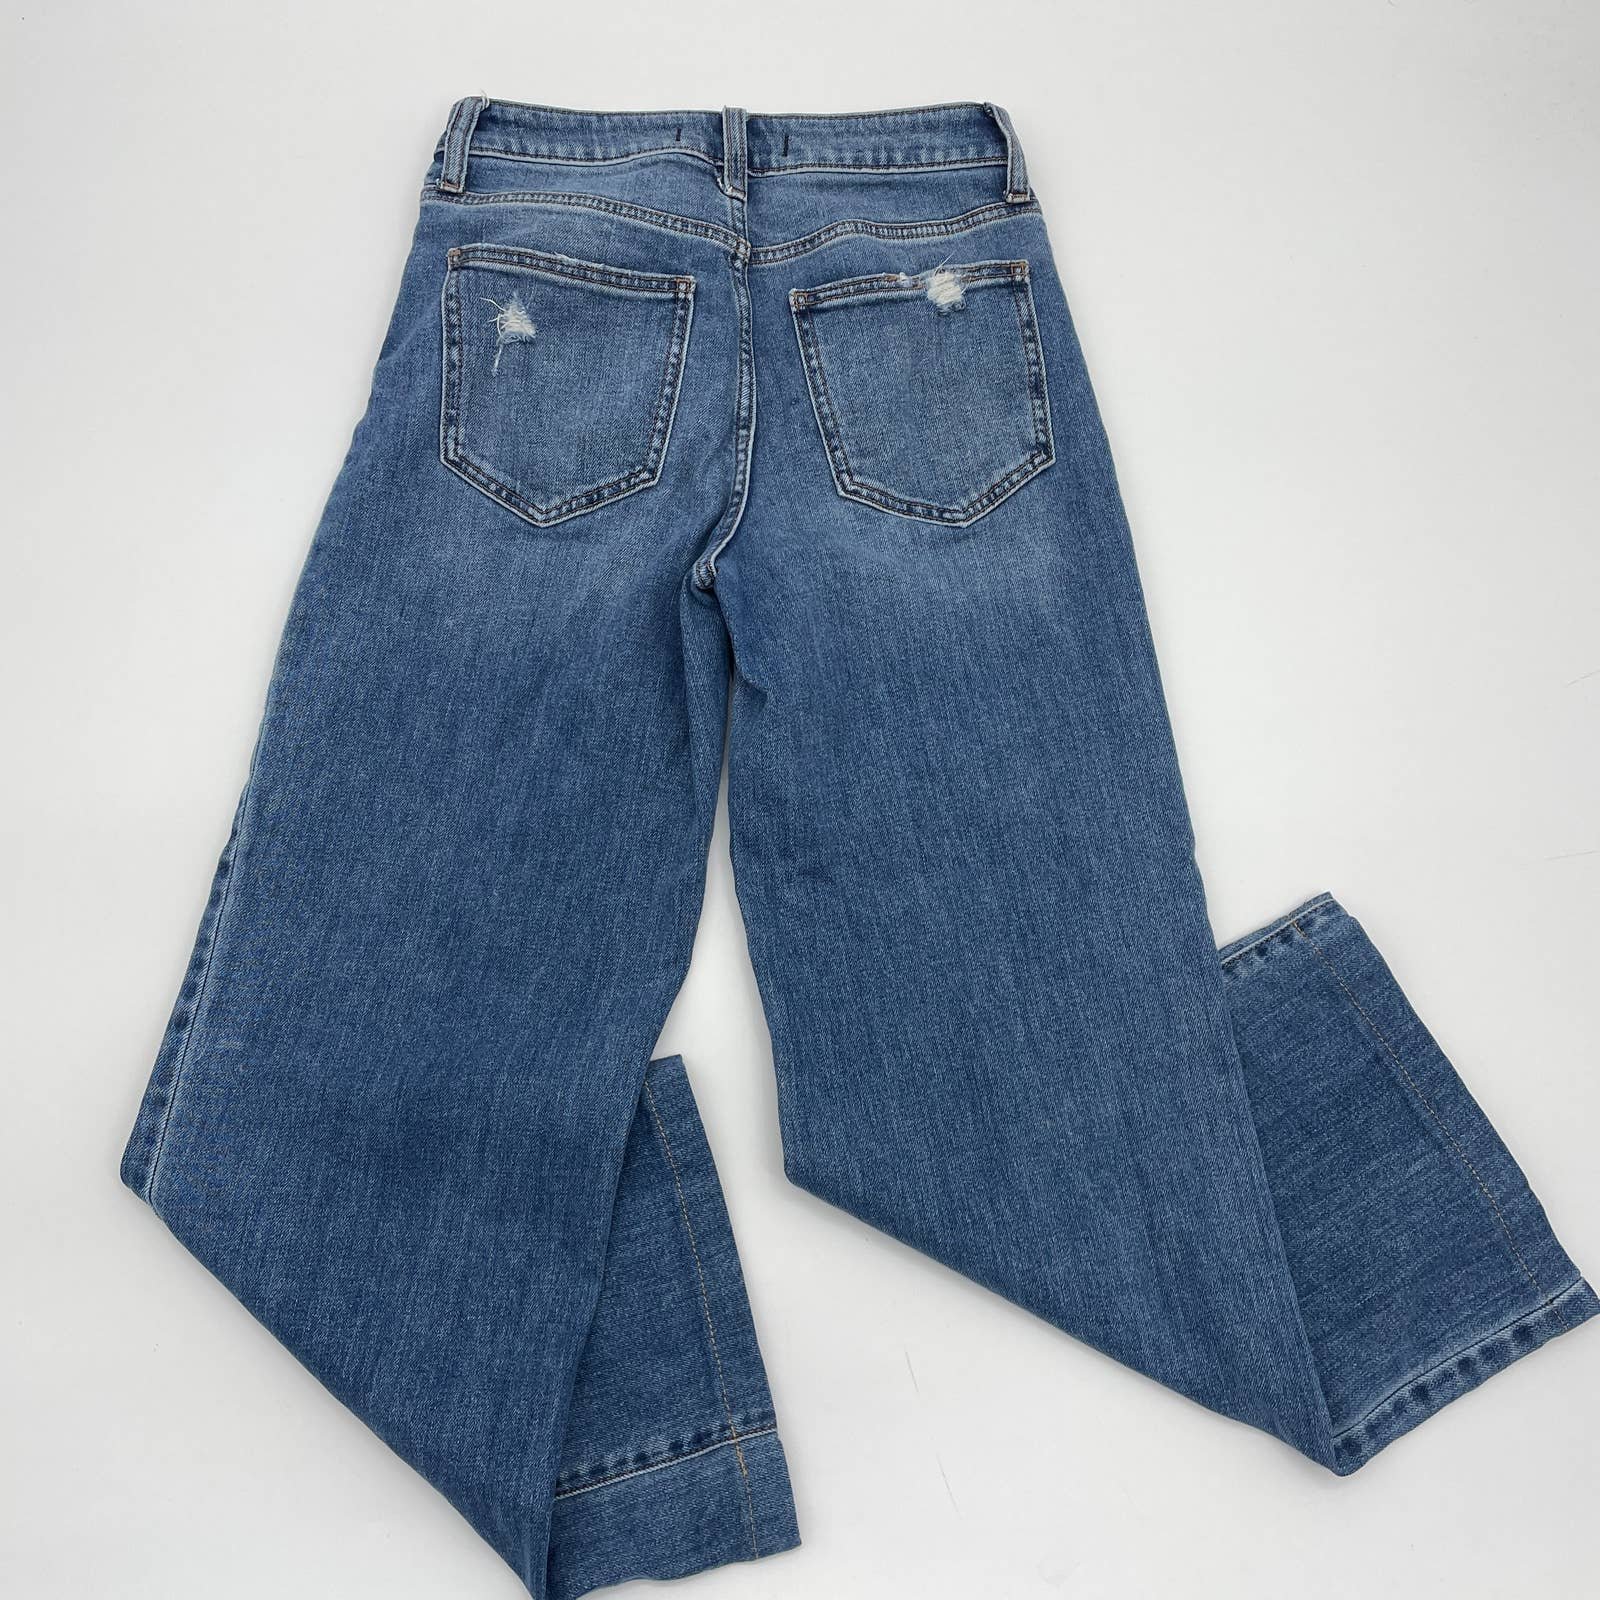 Personality WILLOW & ROOT Jeans By Buckle The Wide Leg High Waist Distressed Women´s Sz 25 PcQMbUwPz Online Exclusive